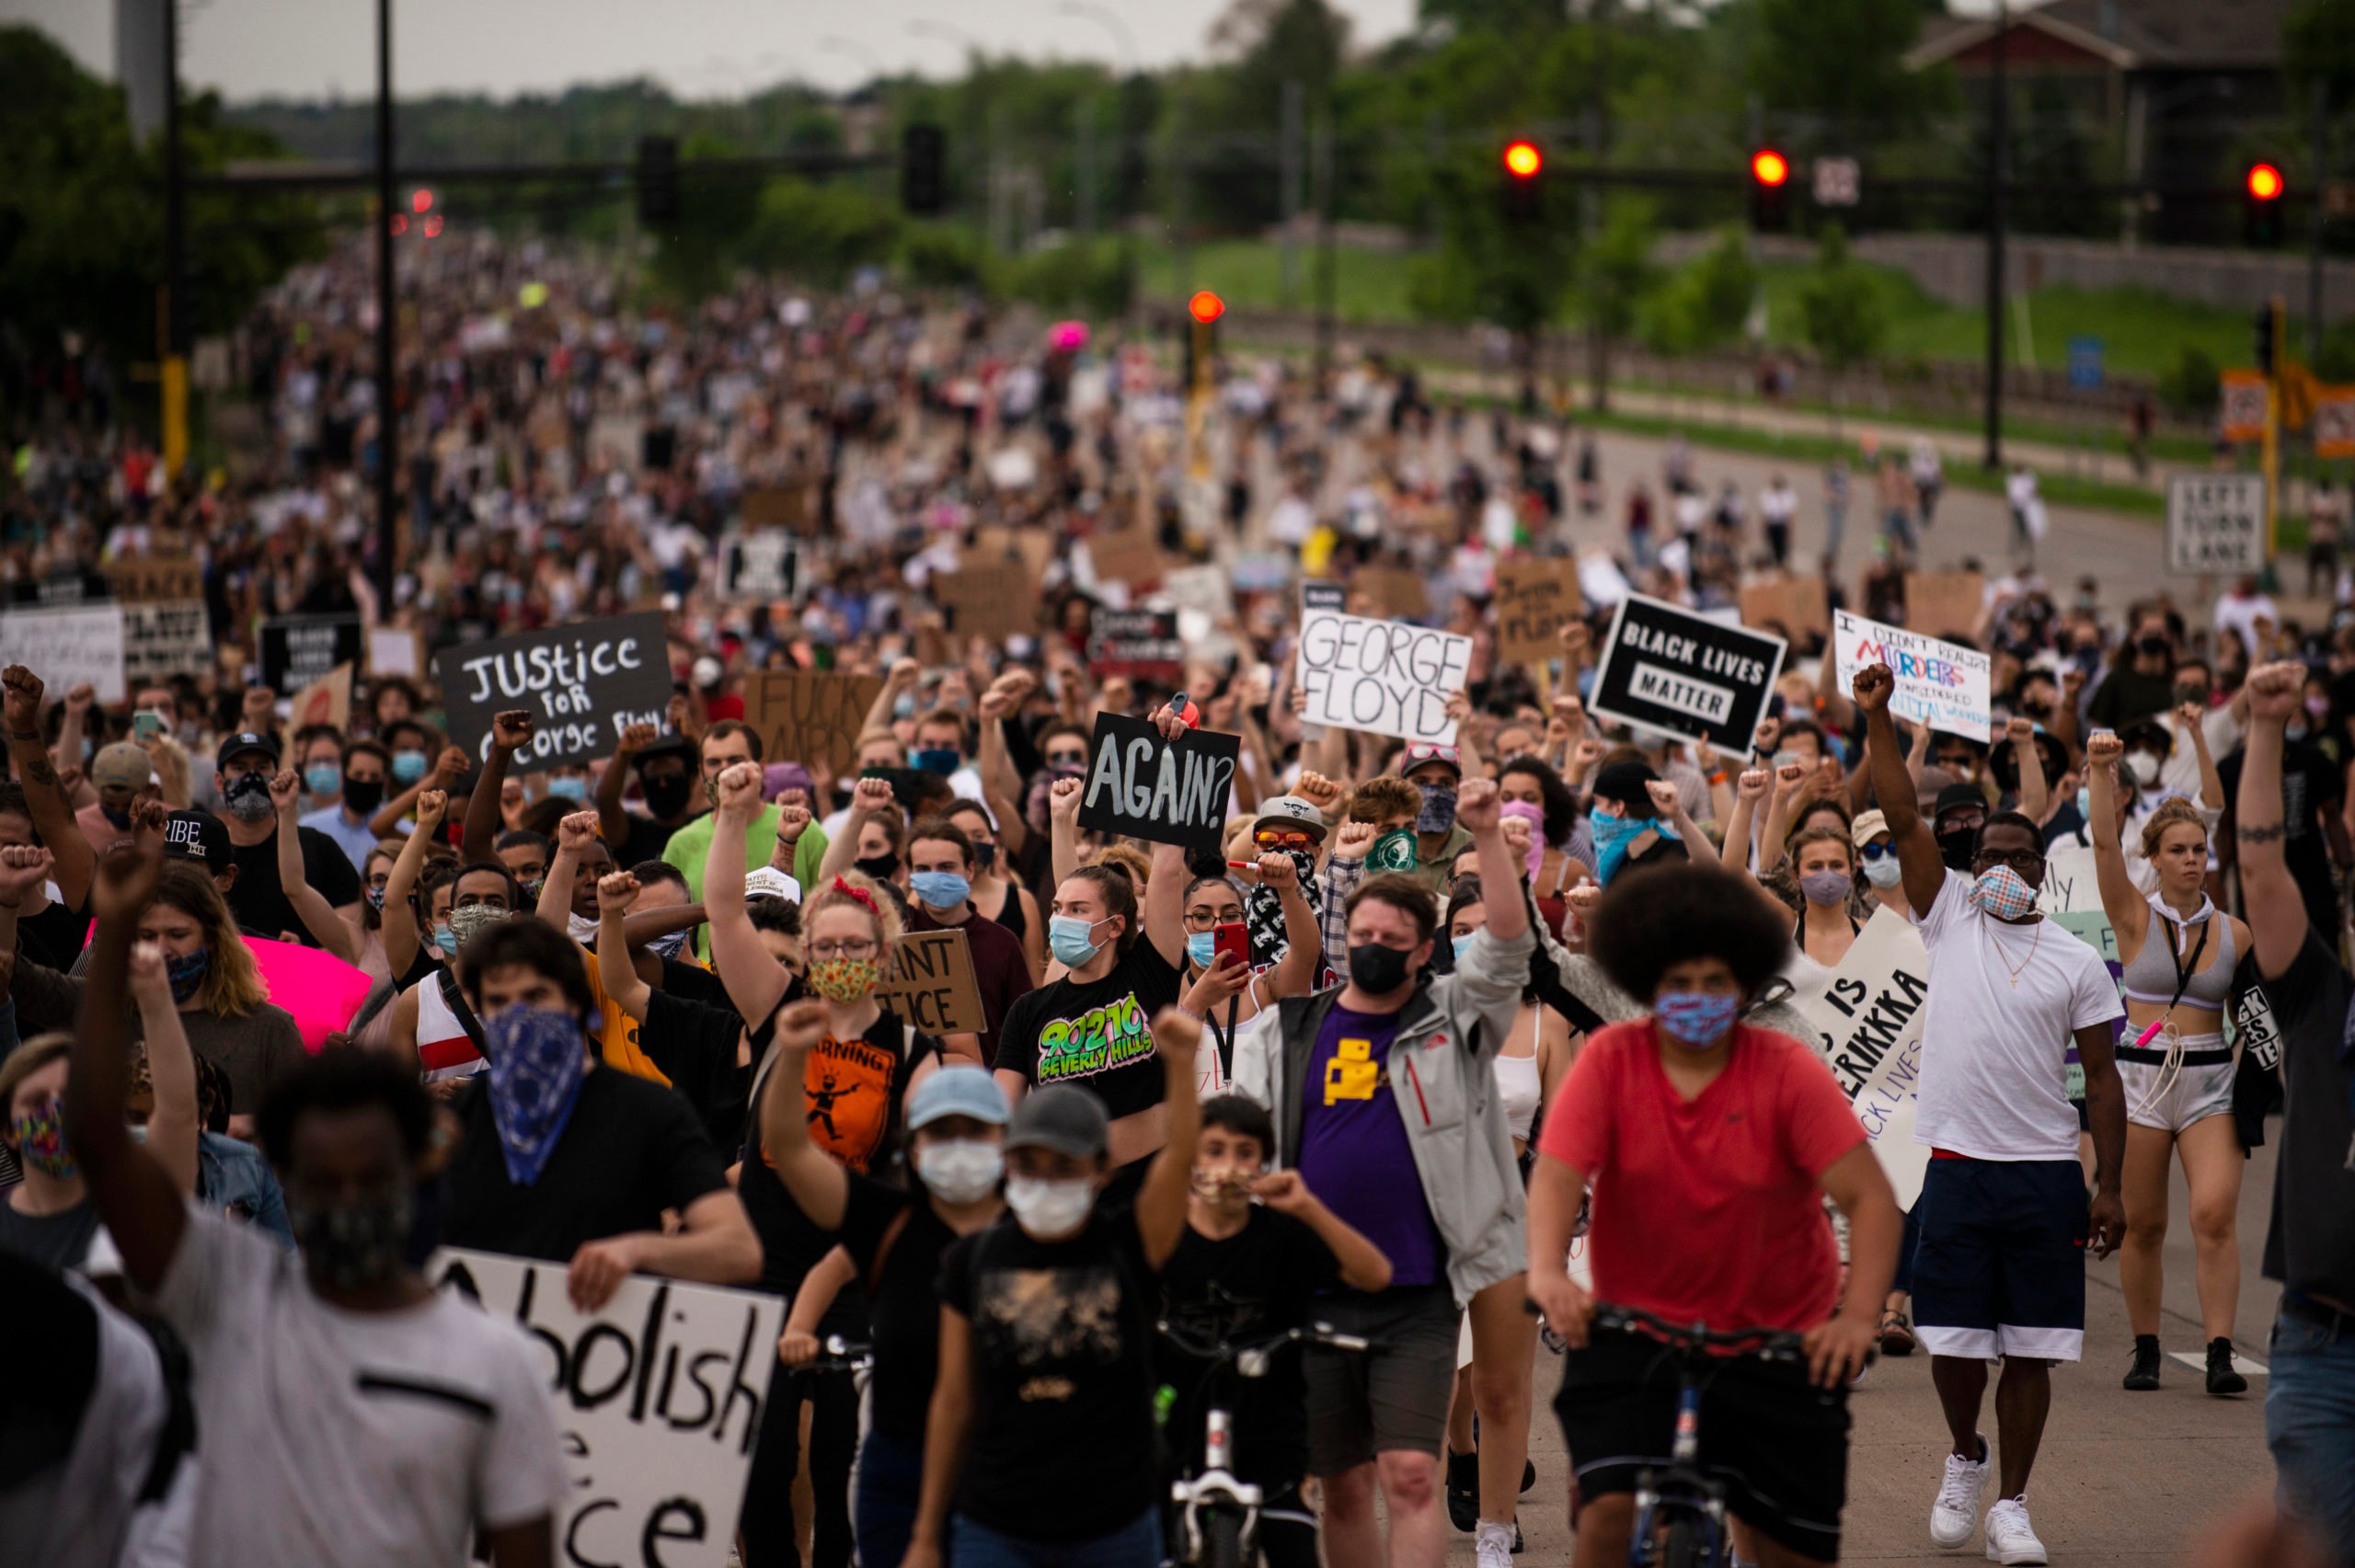 MINNEAPOLIS, MN - MAY 26: Protesters march on Hiawatha Avenue while decrying the killing of George Floyd on May 26, 2020 in Minneapolis, Minnesota. Four Minneapolis police officers have been fired after a video taken by a bystander was posted on social media showing Floyd's neck being pinned to the ground by an officer as he repeatedly said, "I can’t breathe". Floyd was later pronounced dead while in police custody after being transported to Hennepin County Medical Center. (Photo by Stephen Maturen/Getty Images)